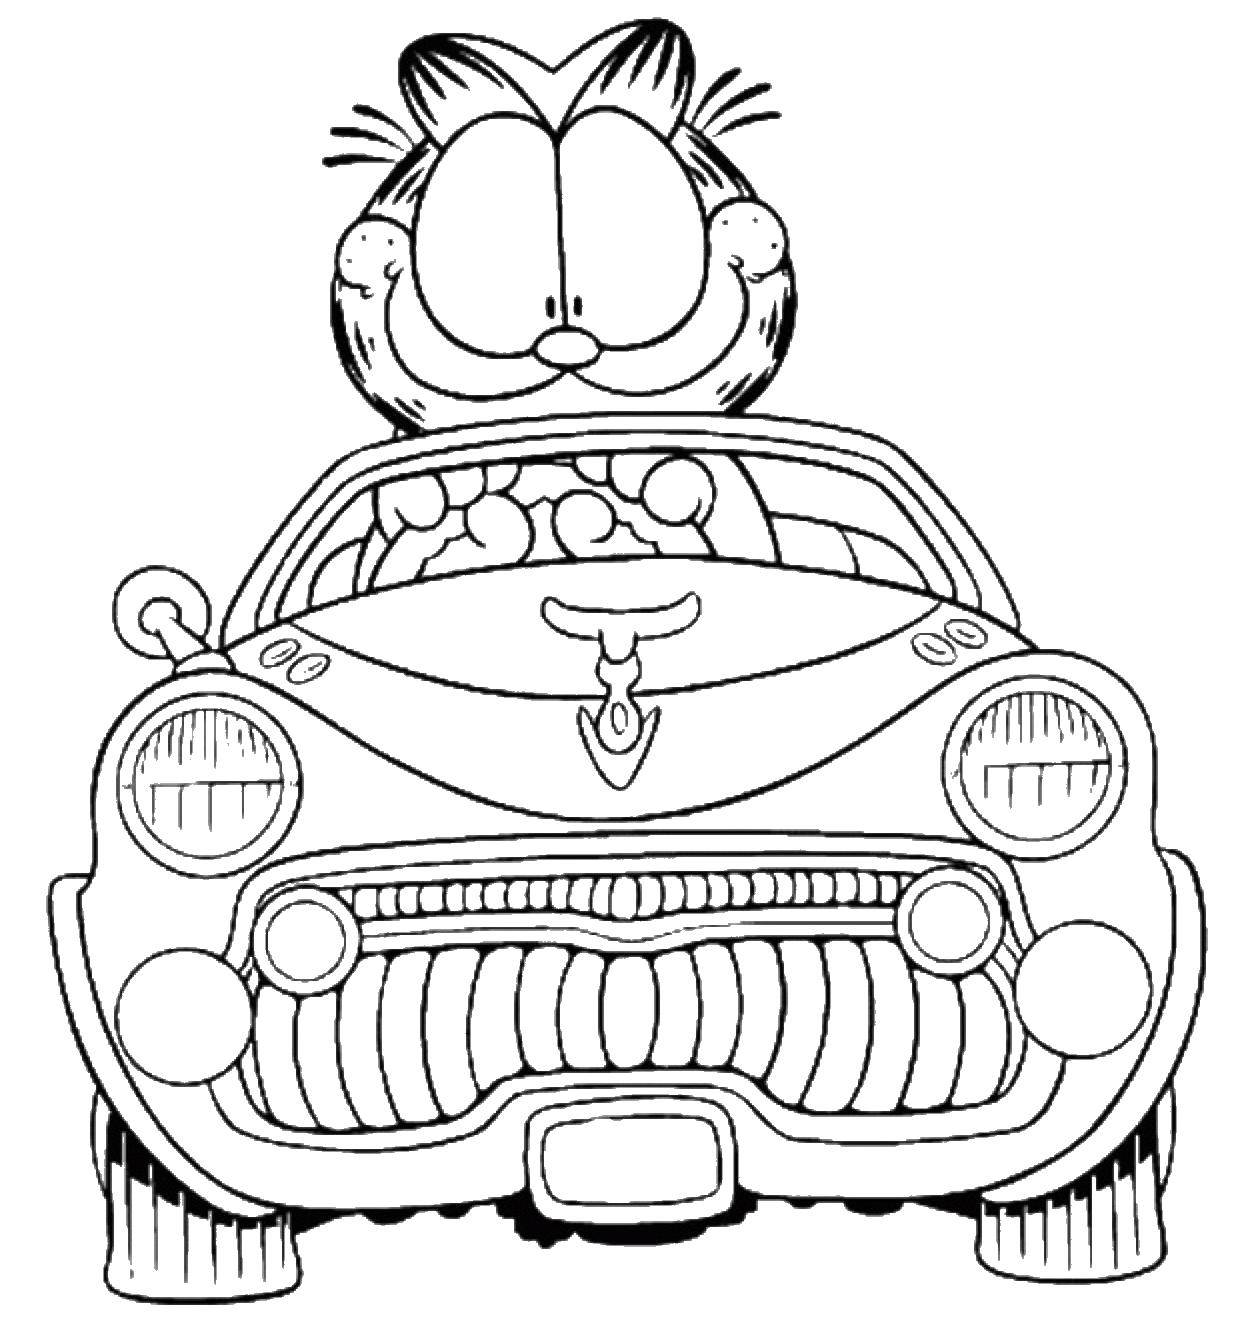 Coloring Garfield drives a car. Category cartoons. Tags:  Garfield , machine.